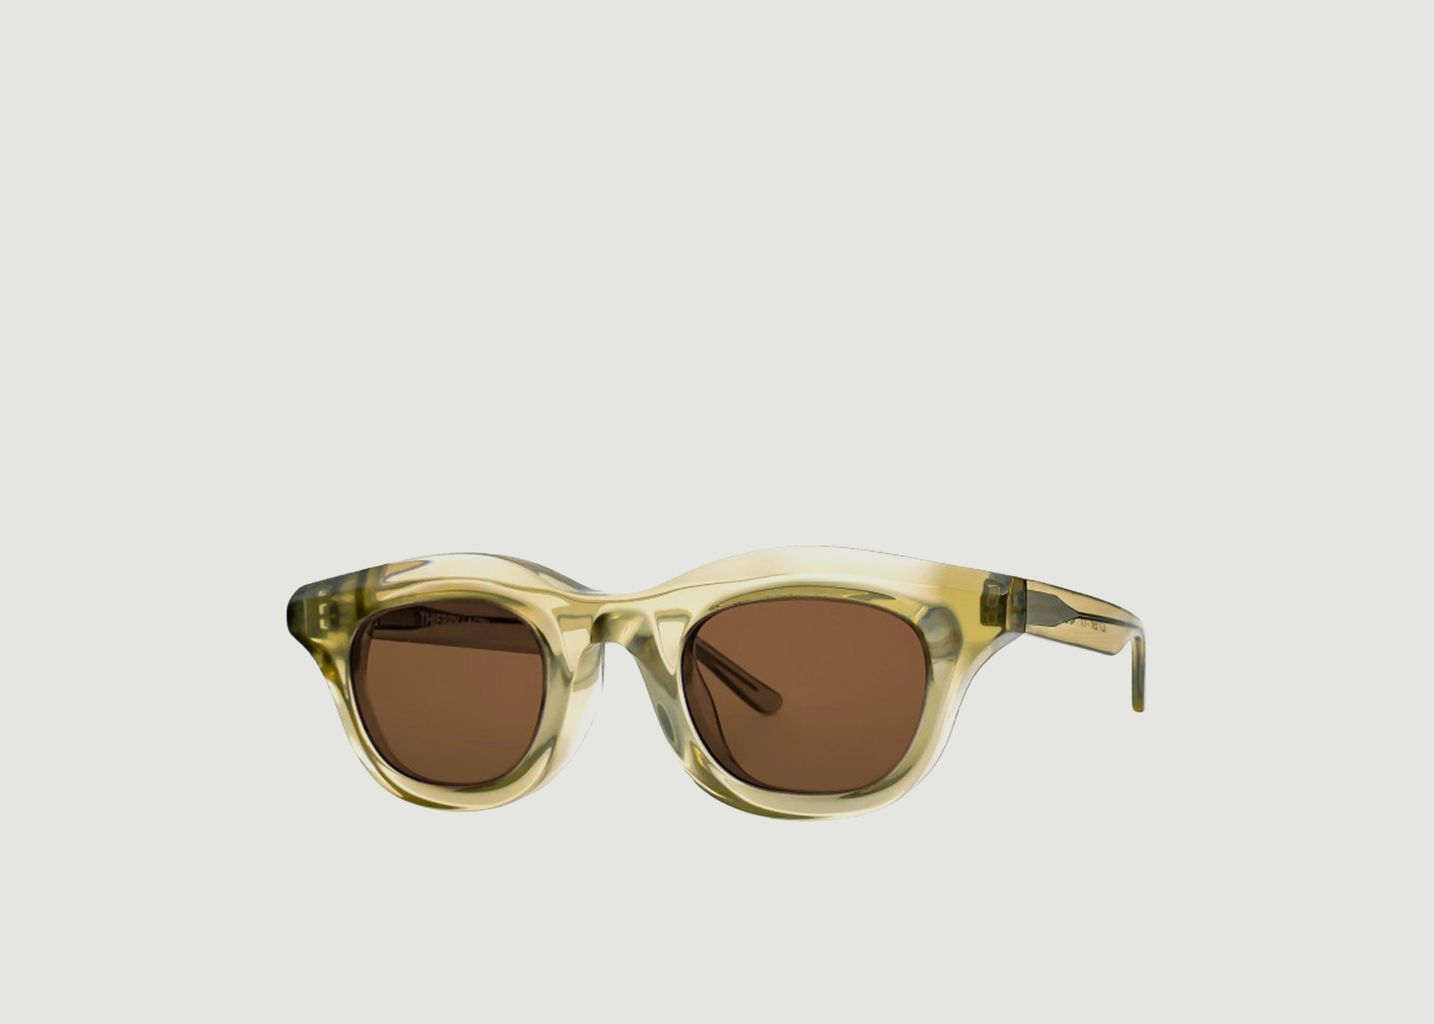 Lottery Sunglasses - Thierry Lasry